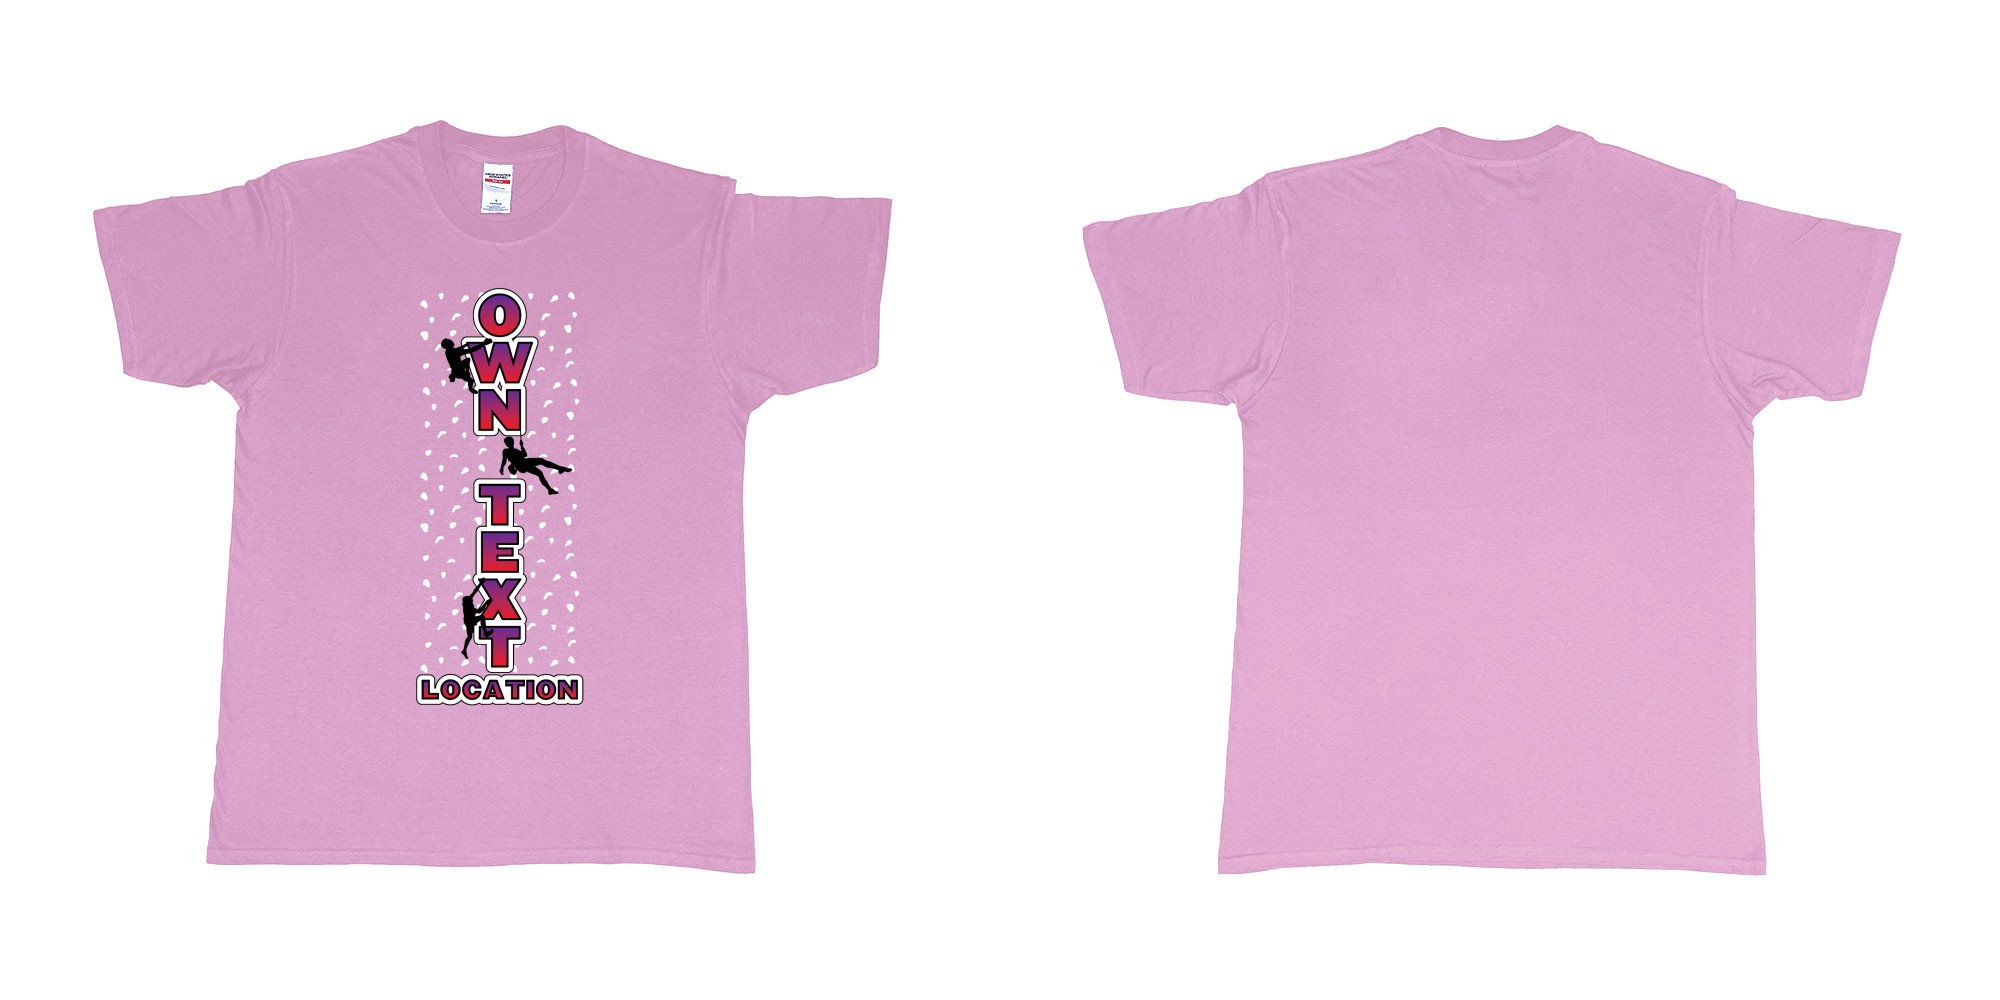 Custom tshirt design bolder climbing rock climbing own custom text location tshirt design in fabric color light-pink choice your own text made in Bali by The Pirate Way